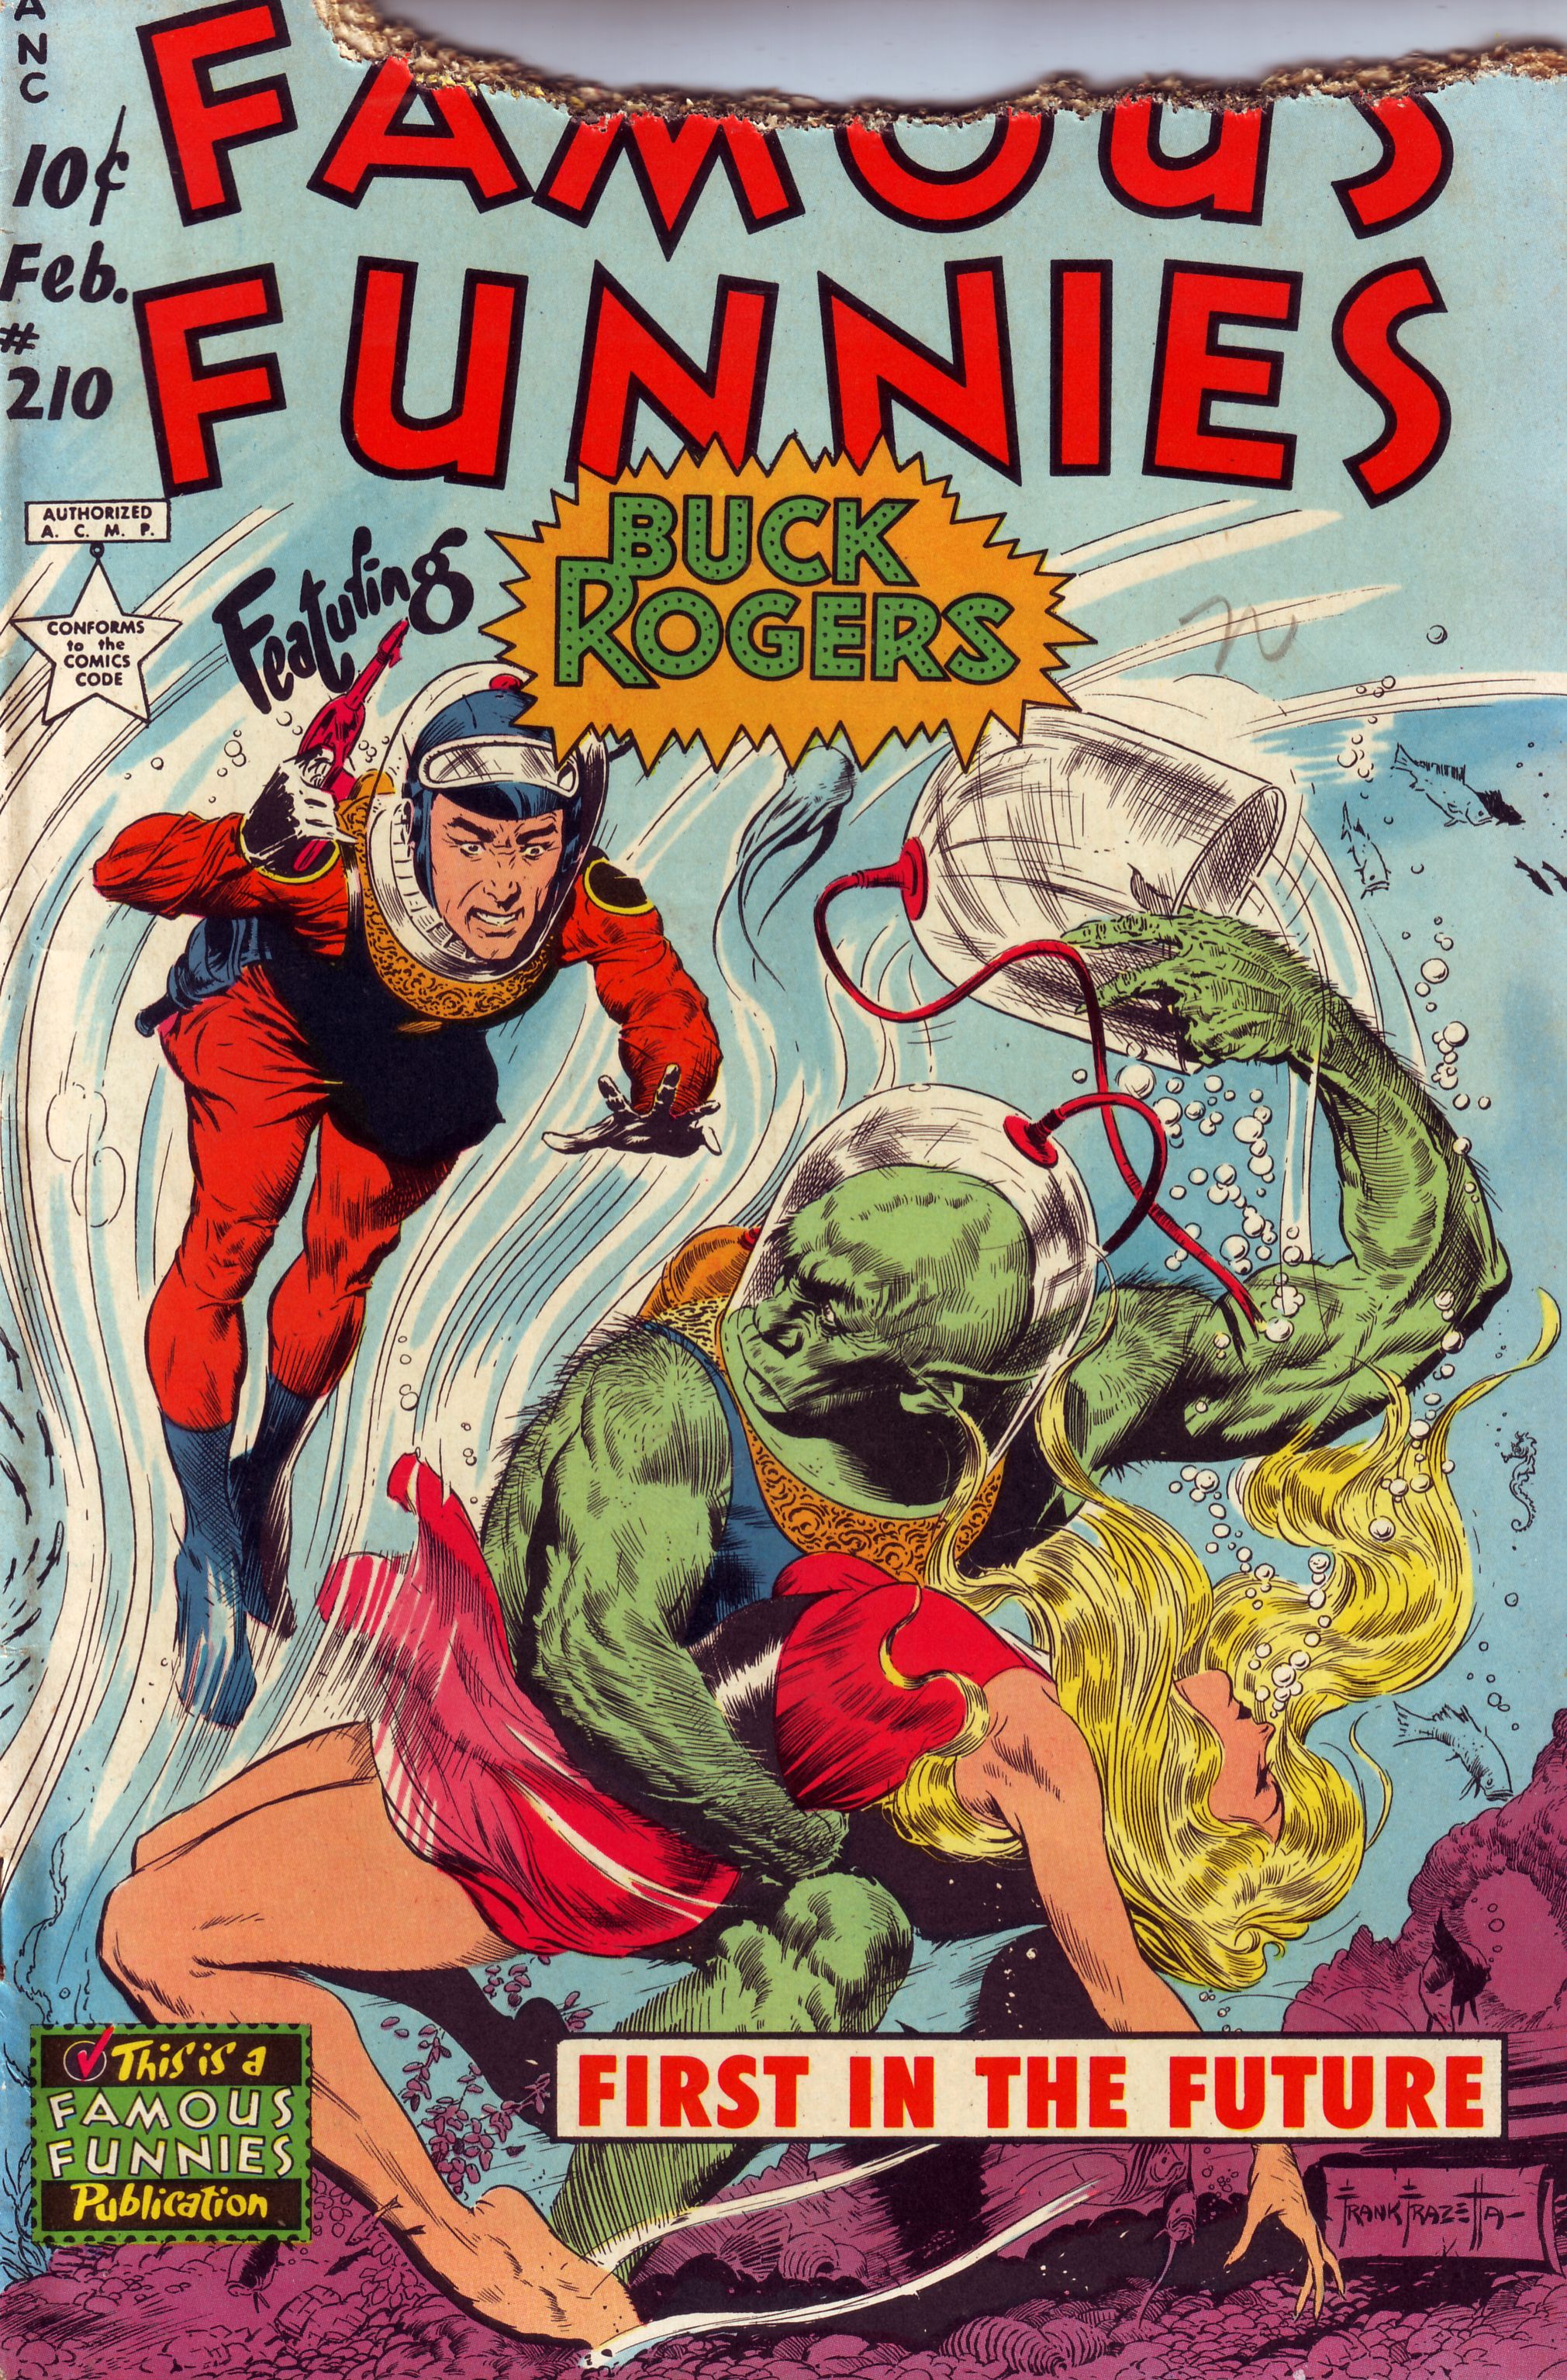 Read online Famous Funnies comic -  Issue #210 - 2